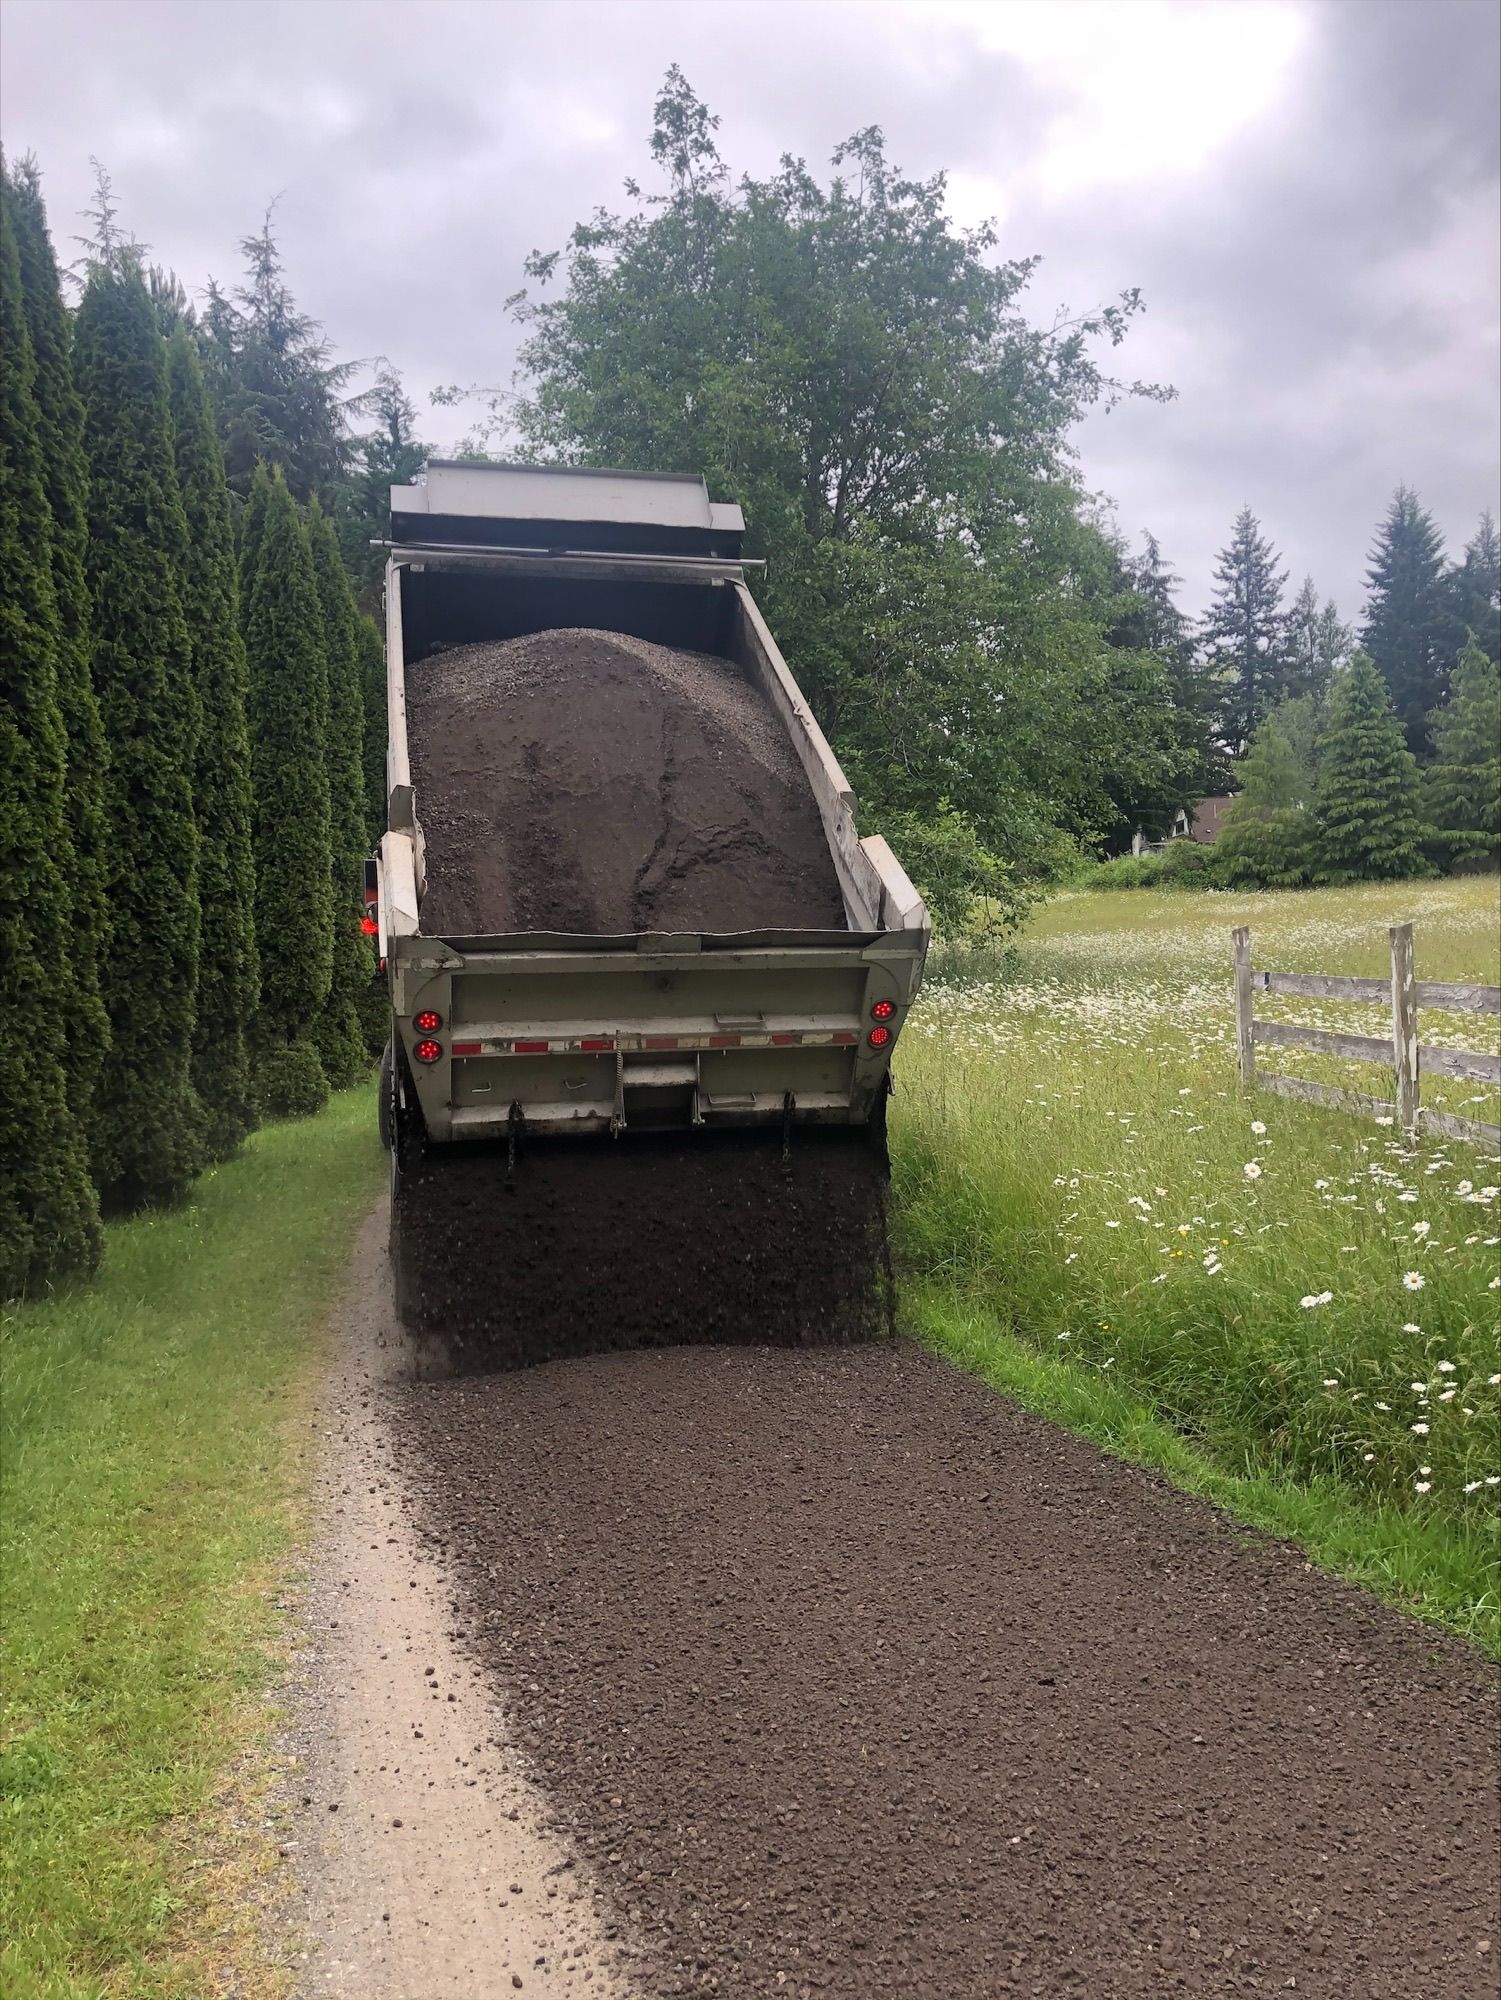 Are you in need of high-quality gravel and sand for your upcoming projects? Contact Us Today!